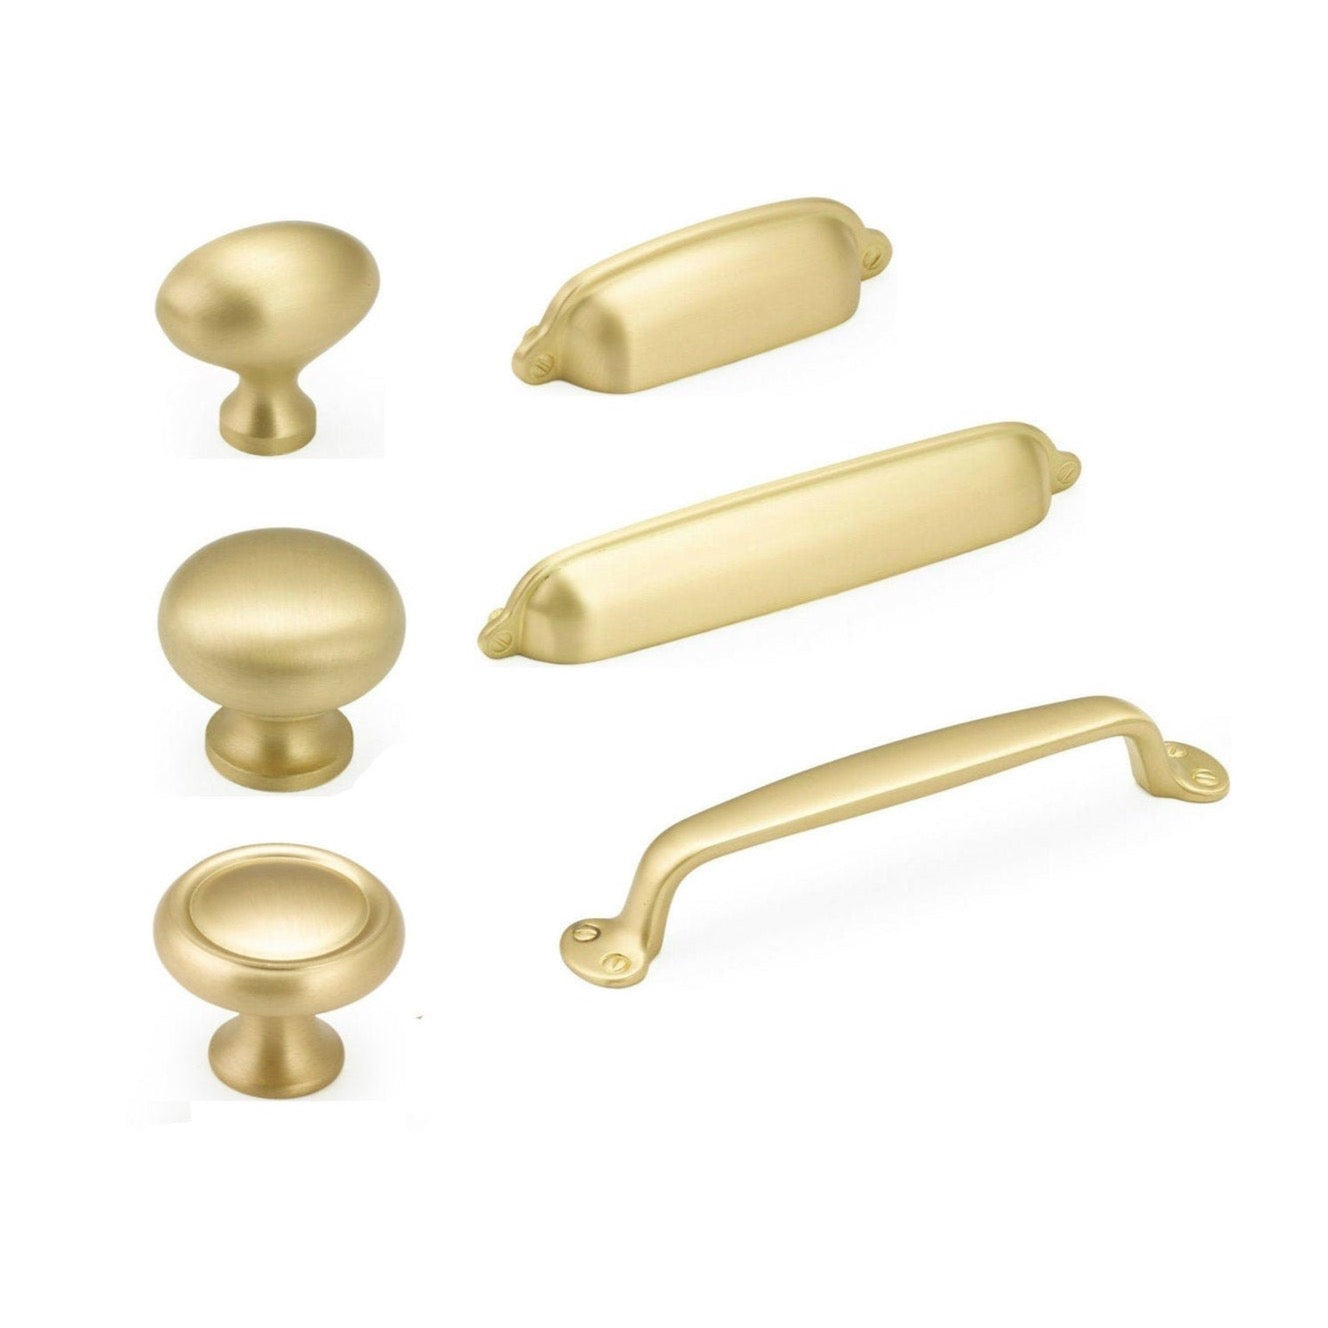 Cabinet Drawer Pulls Cup Pulls Hardware Handles Drawer Handles Knobs for  Yellow